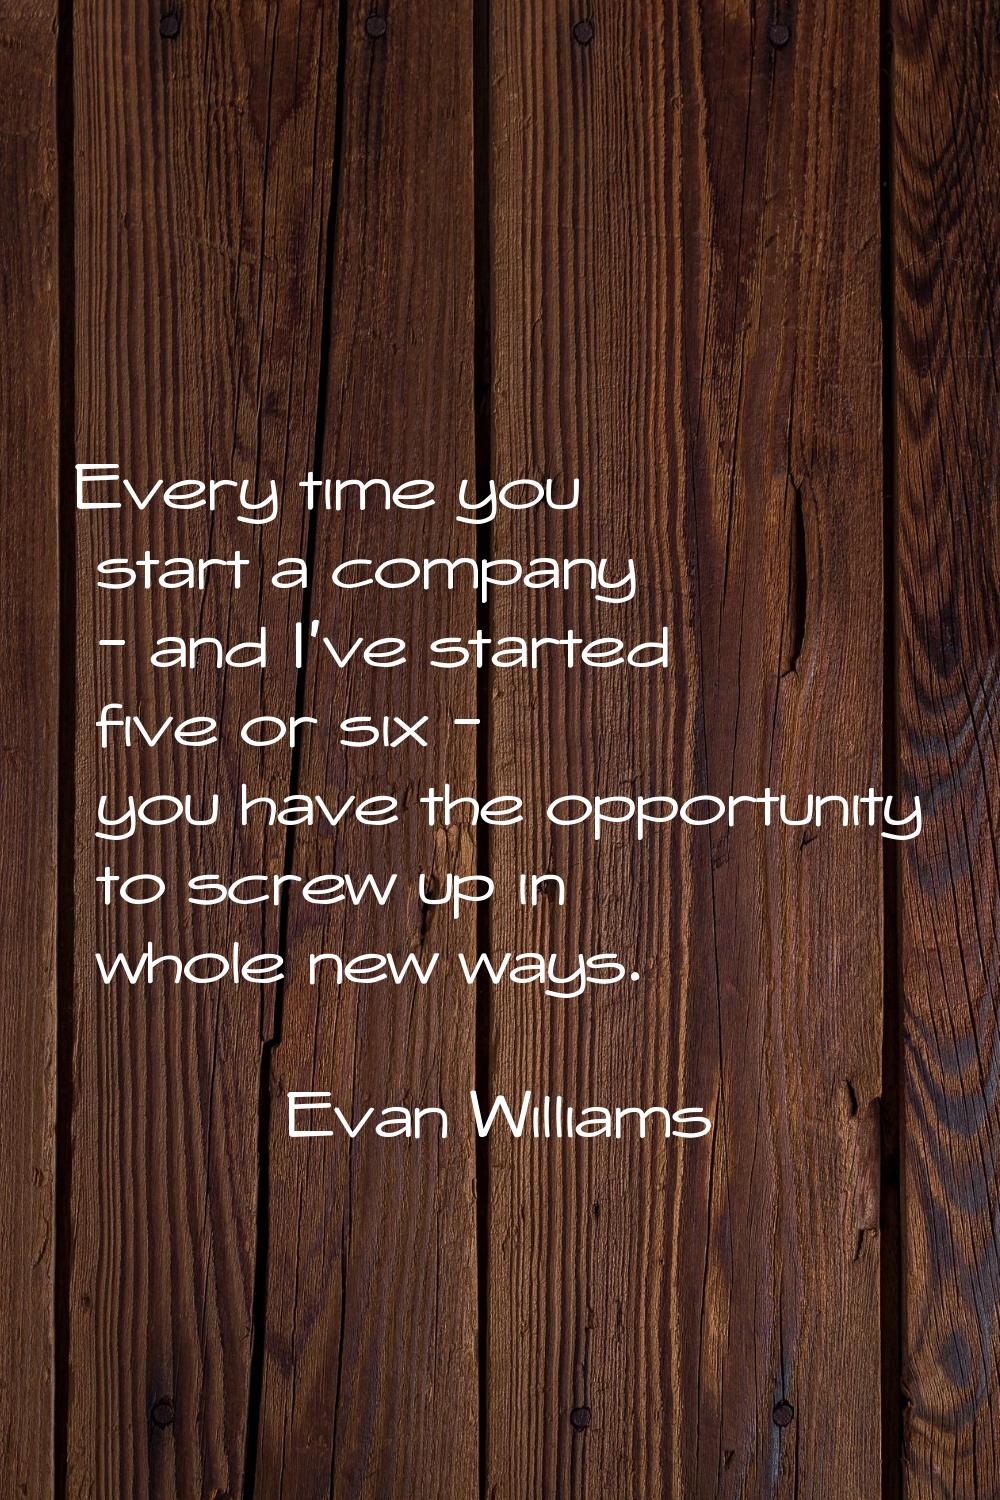 Every time you start a company - and I've started five or six - you have the opportunity to screw u